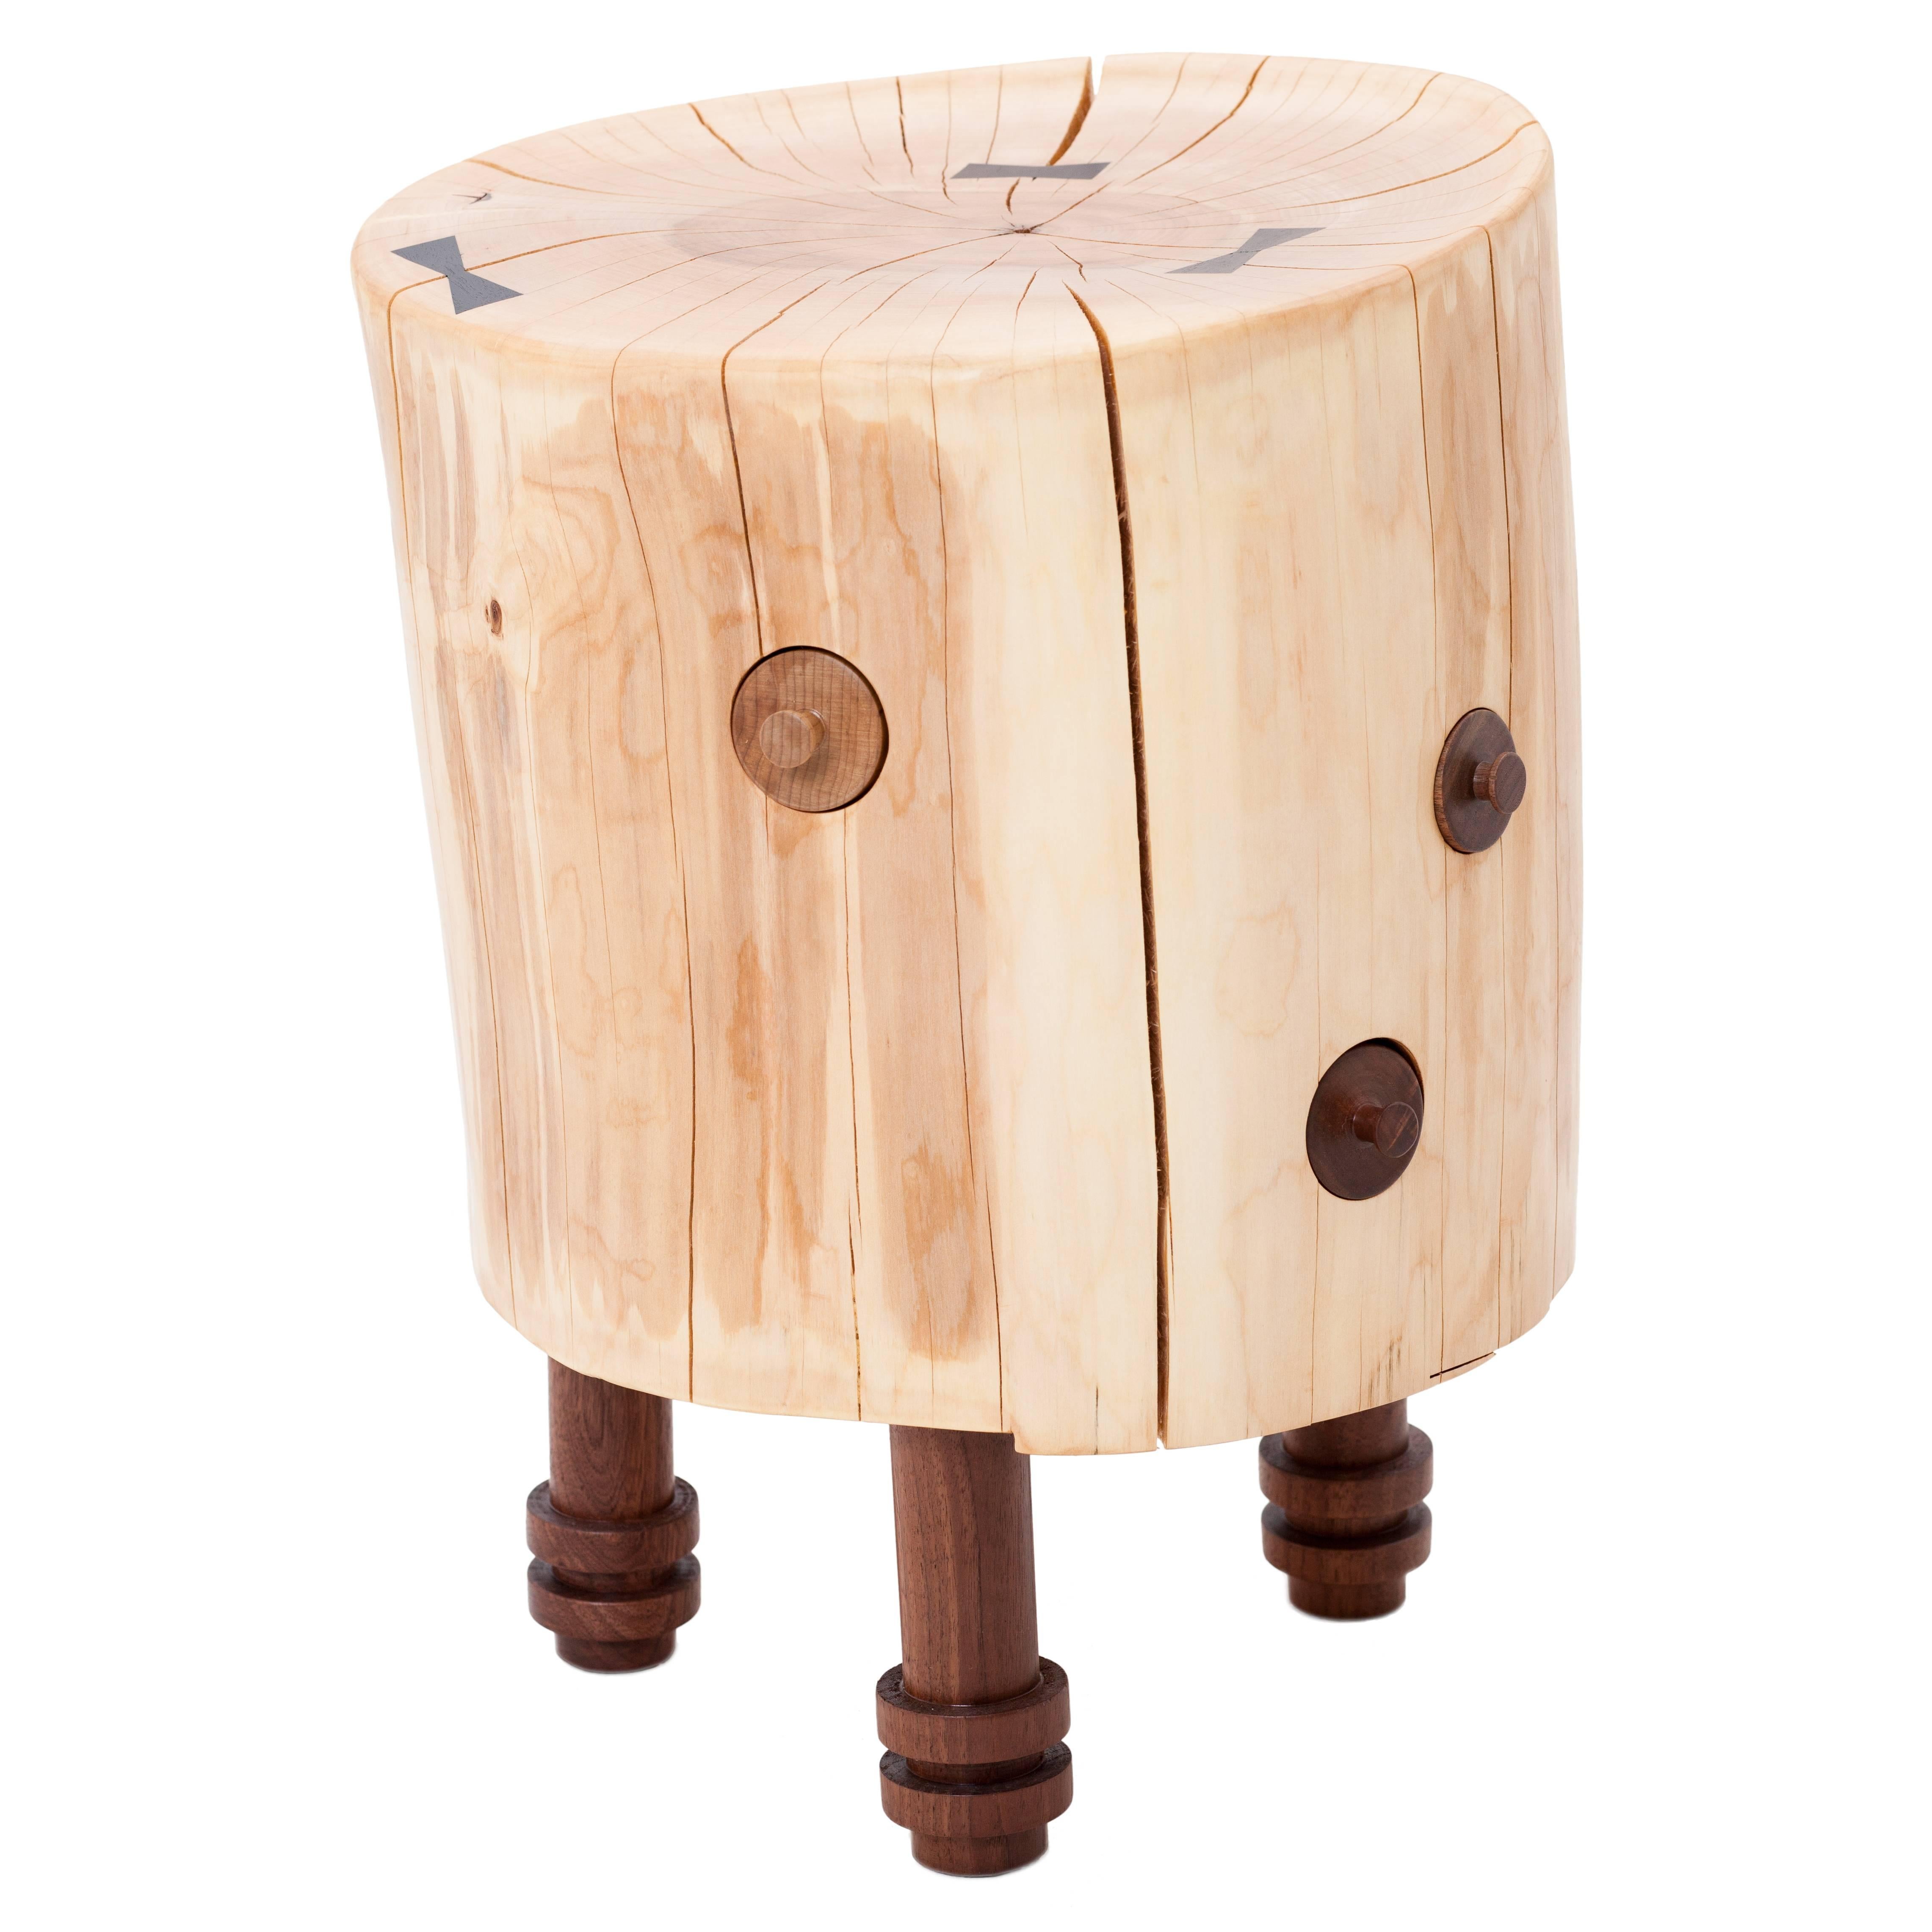 Contemporary Reclaimed Salvaged Hurricane Sandy Stump Stools with Hand-Turned Legs & Drawers